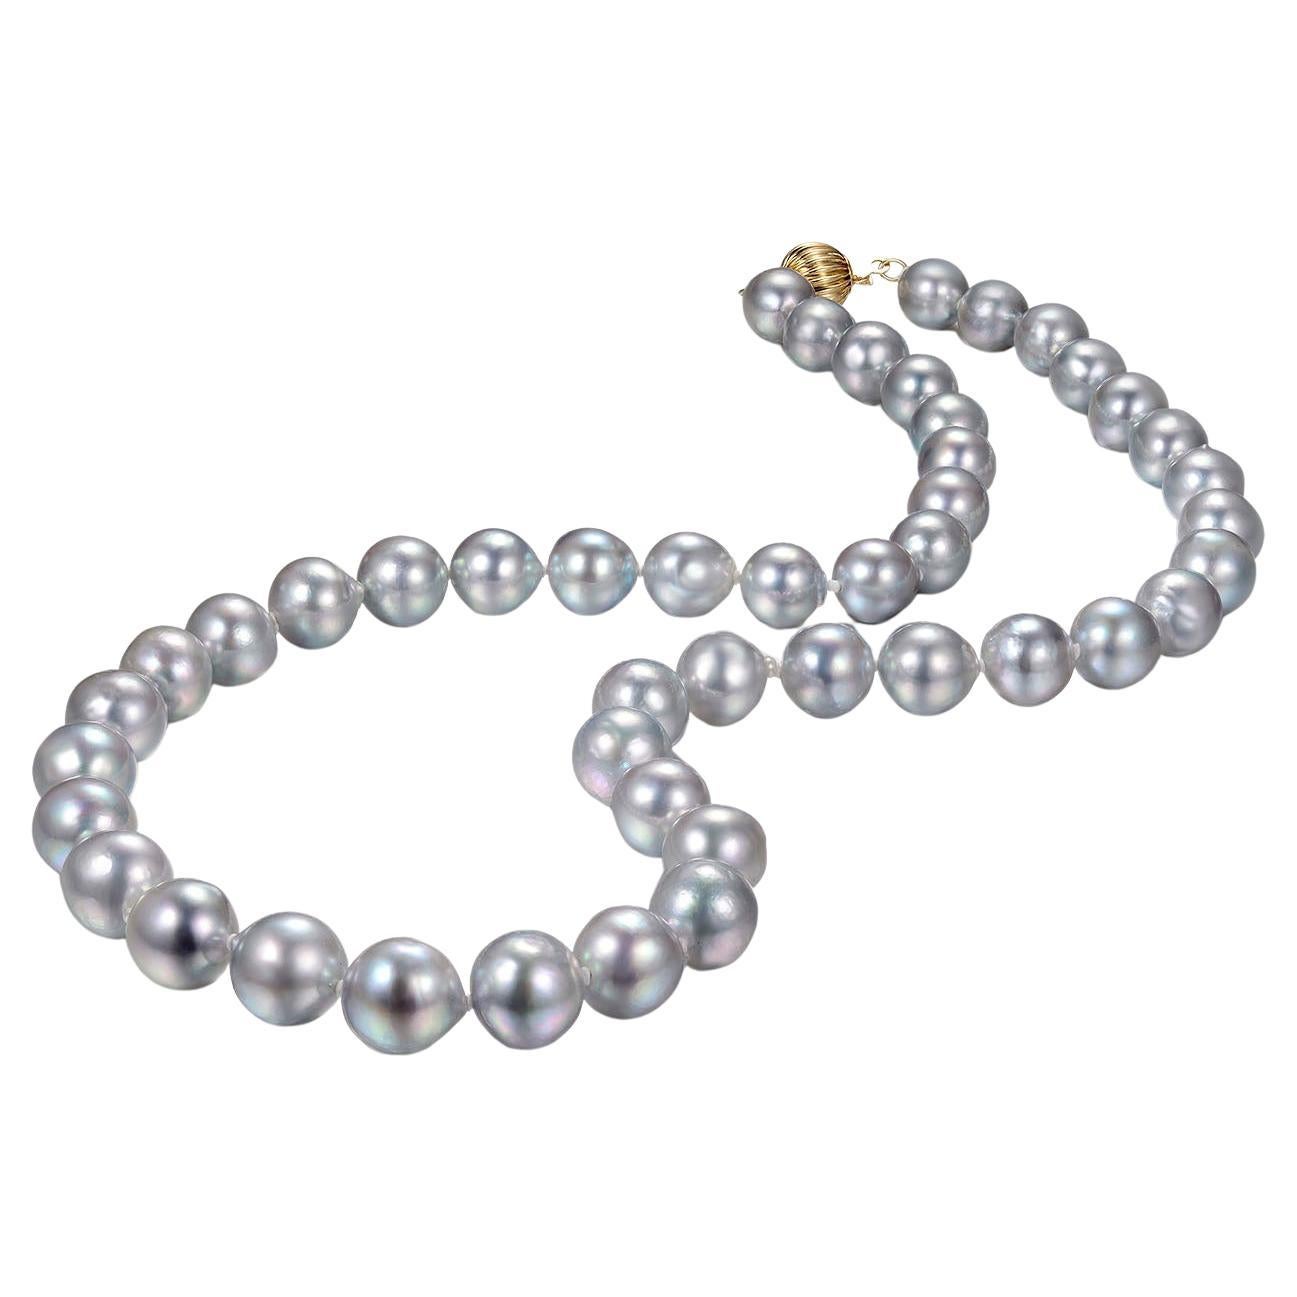 This pearl necklace features Akoya AA+ grade silver blue color baroque pearl. Each pearl range from 8-9mm. Absolutely great luster through out the entire necklace. 
The most famous and traditional Akoya pearl color is White, which itself is tinged